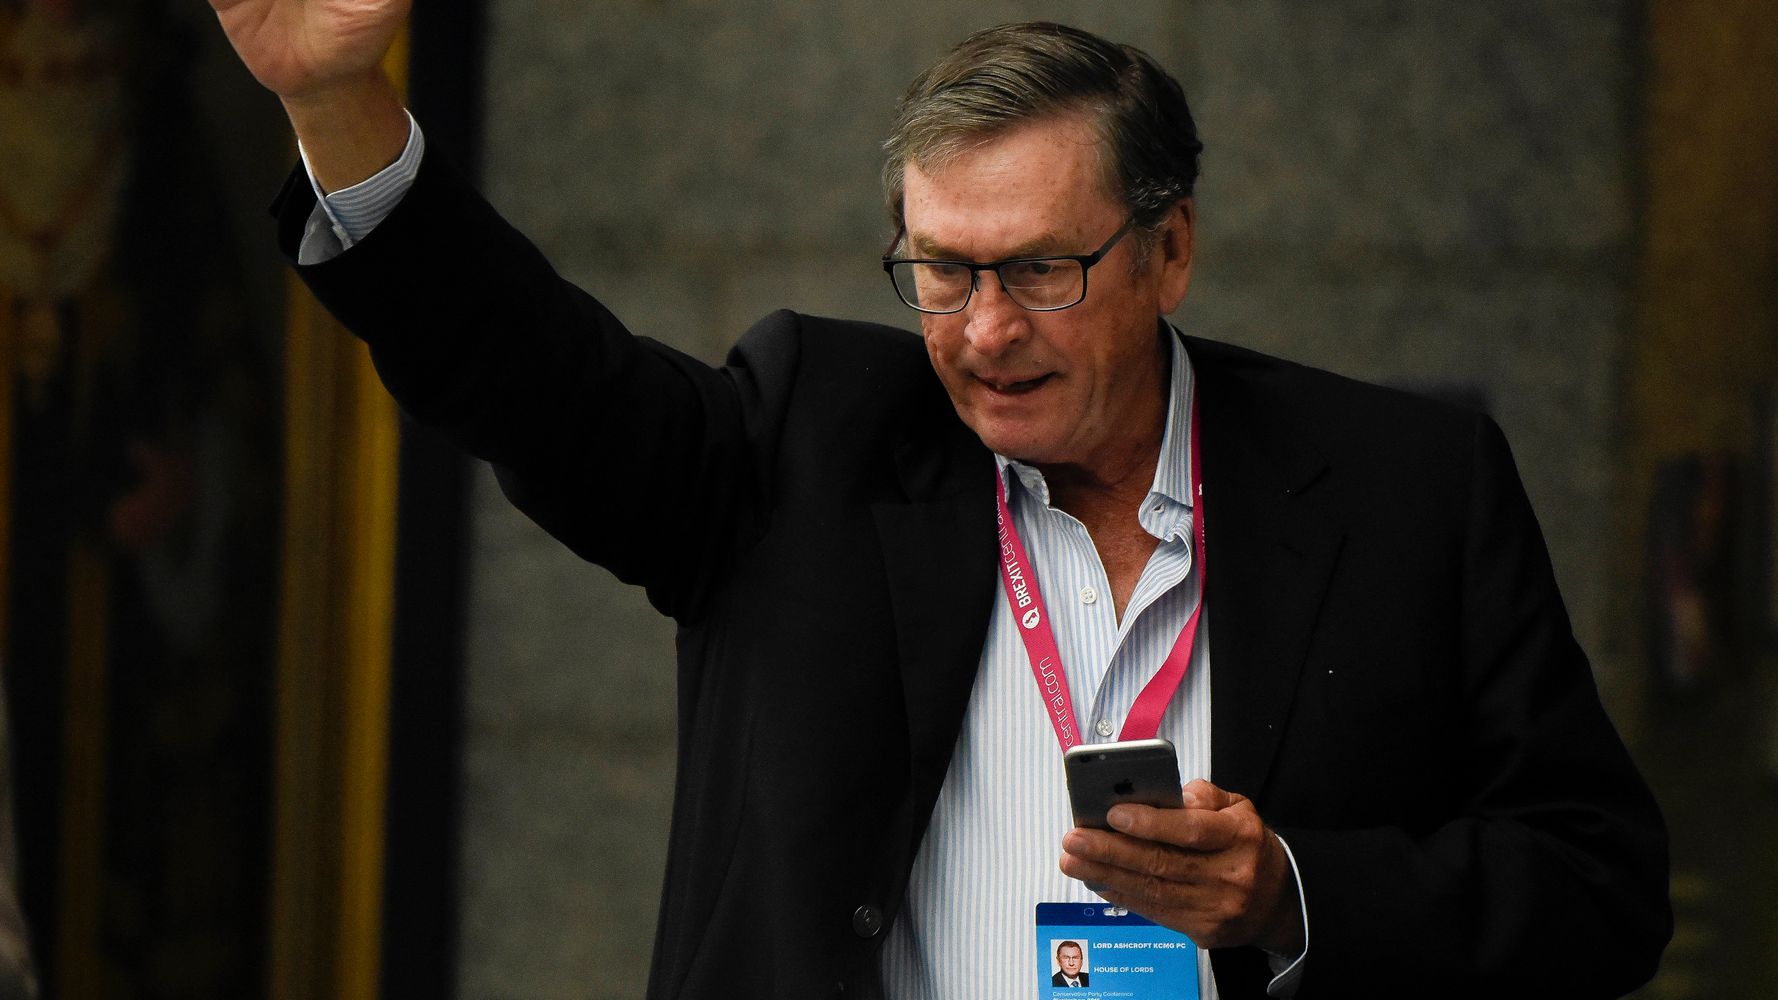 Michael Ashcroft wearing a black coat while raising his hand and holding a phone